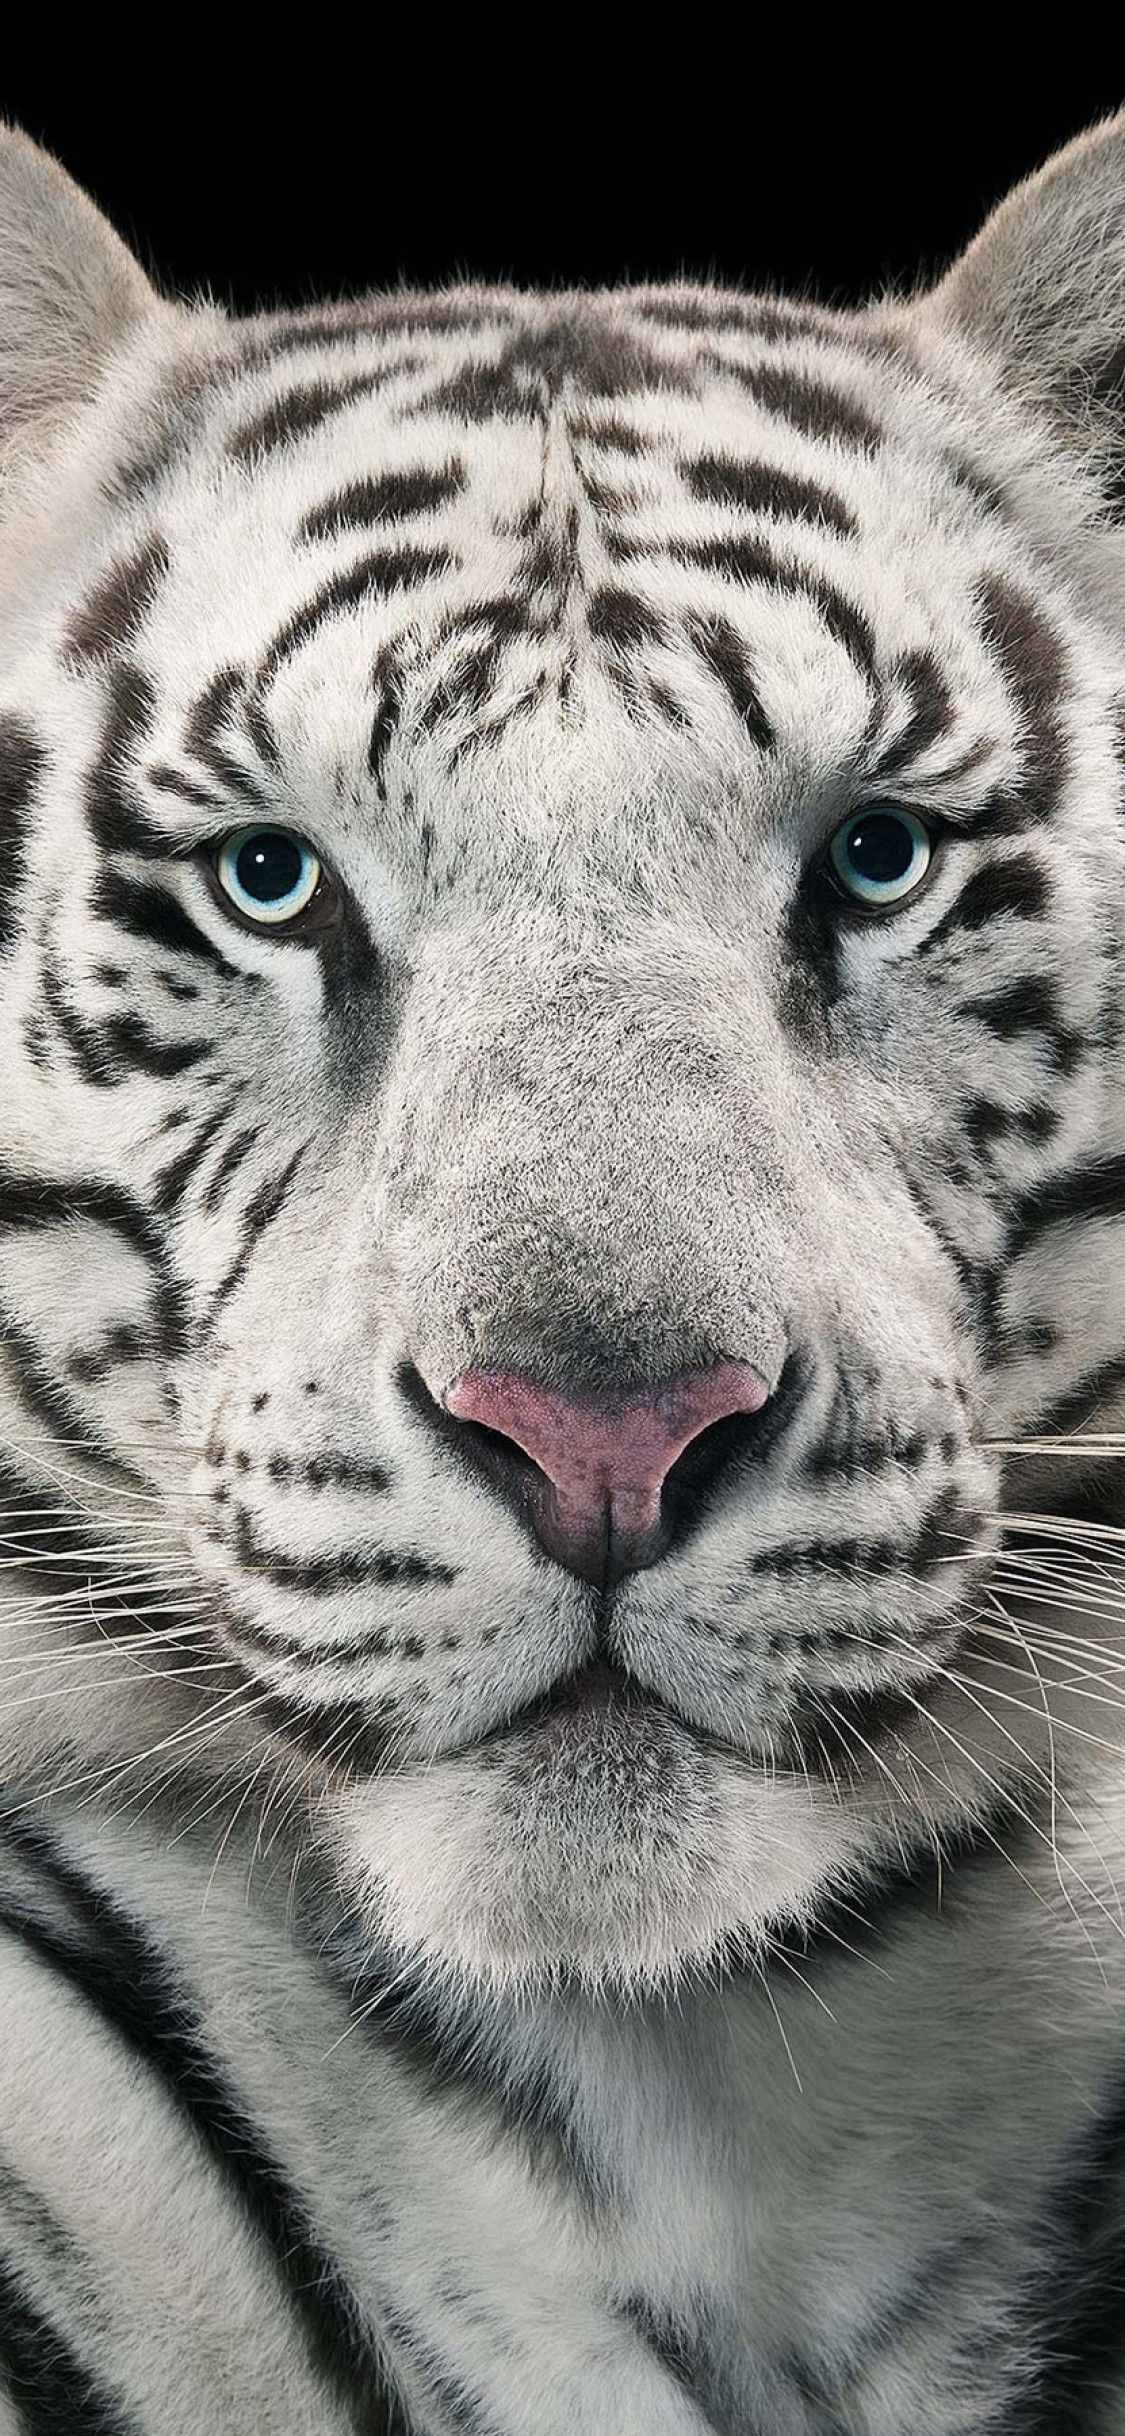 Download 1125x2436 White Tiger, Close Up Face Wallpaper